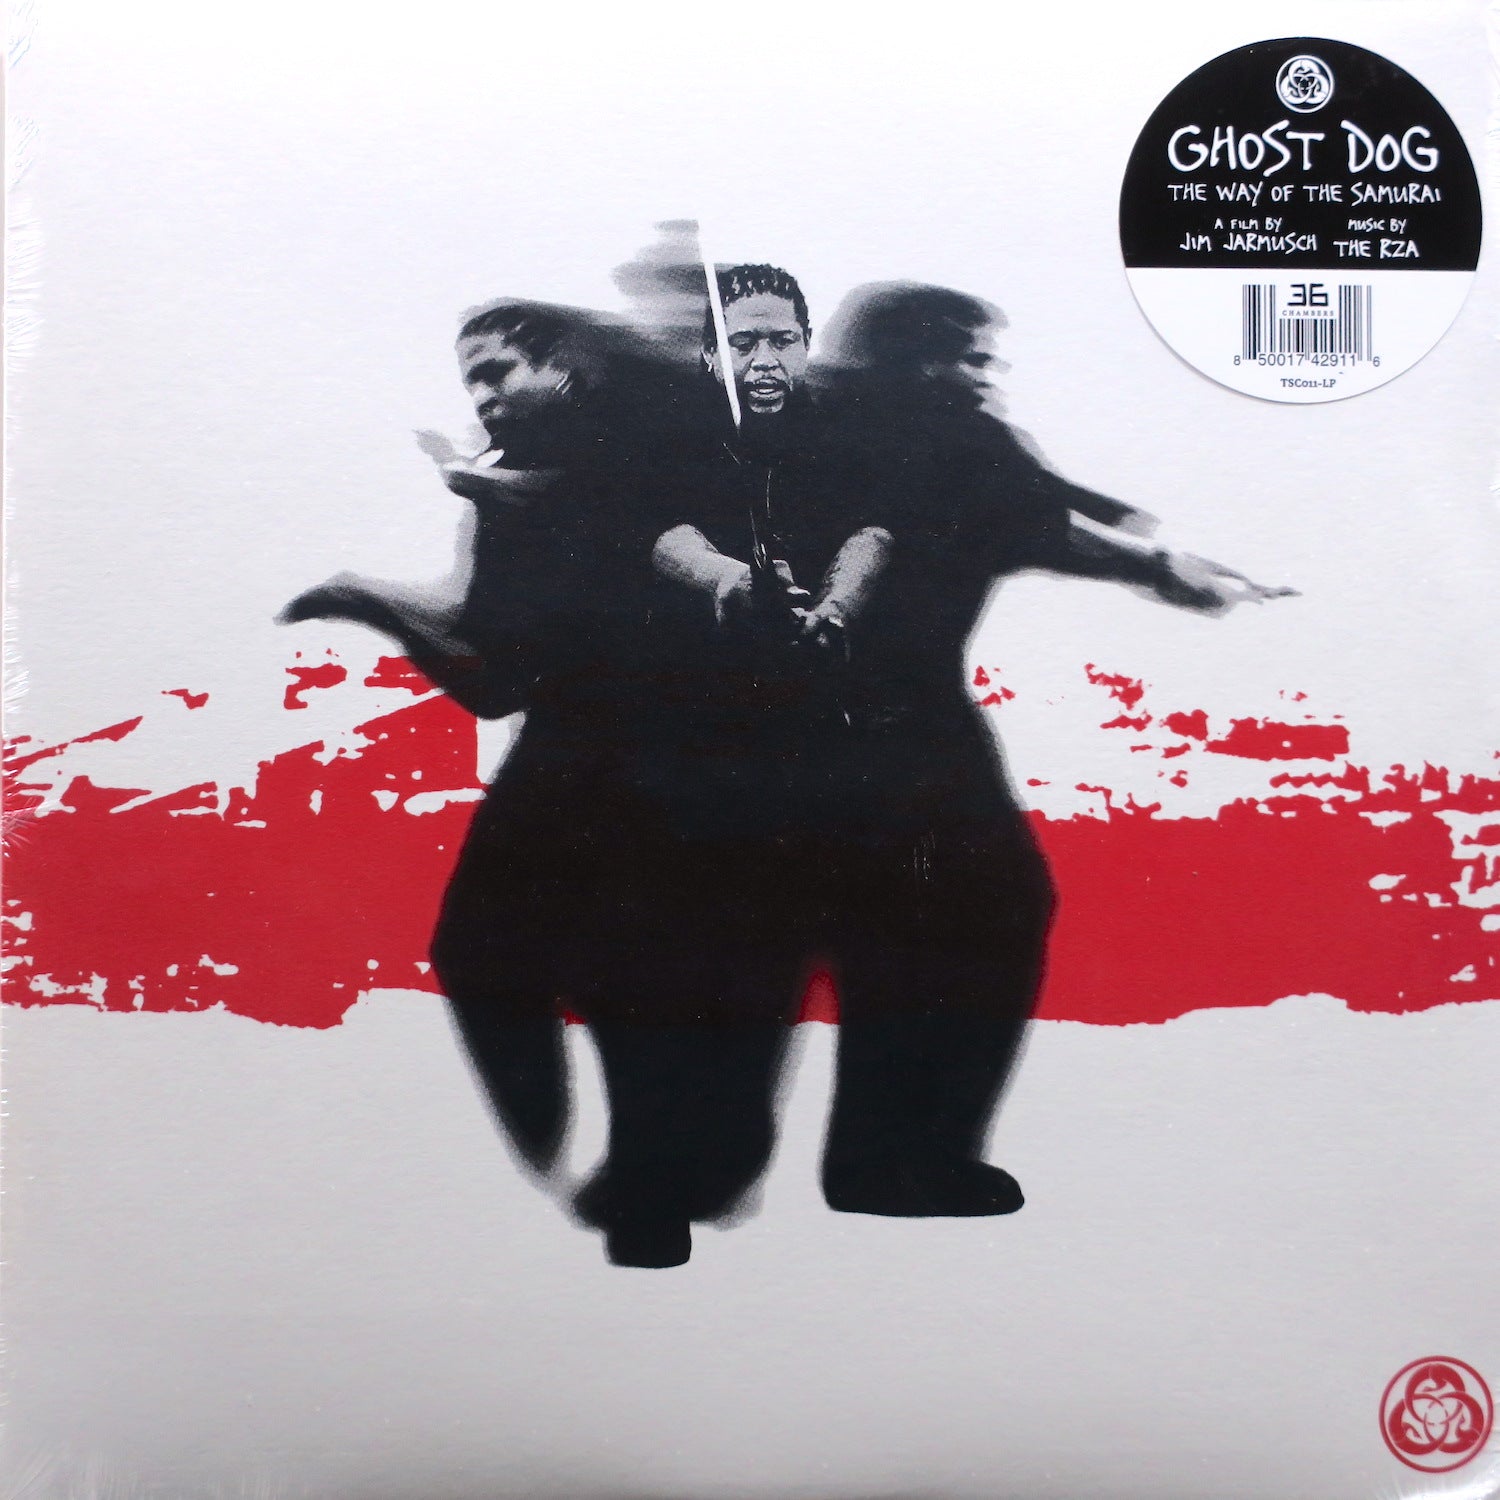 'GHOST DOG: WAY OF THE SAMURAI' Soundtrack by RZA Vinyl LP 